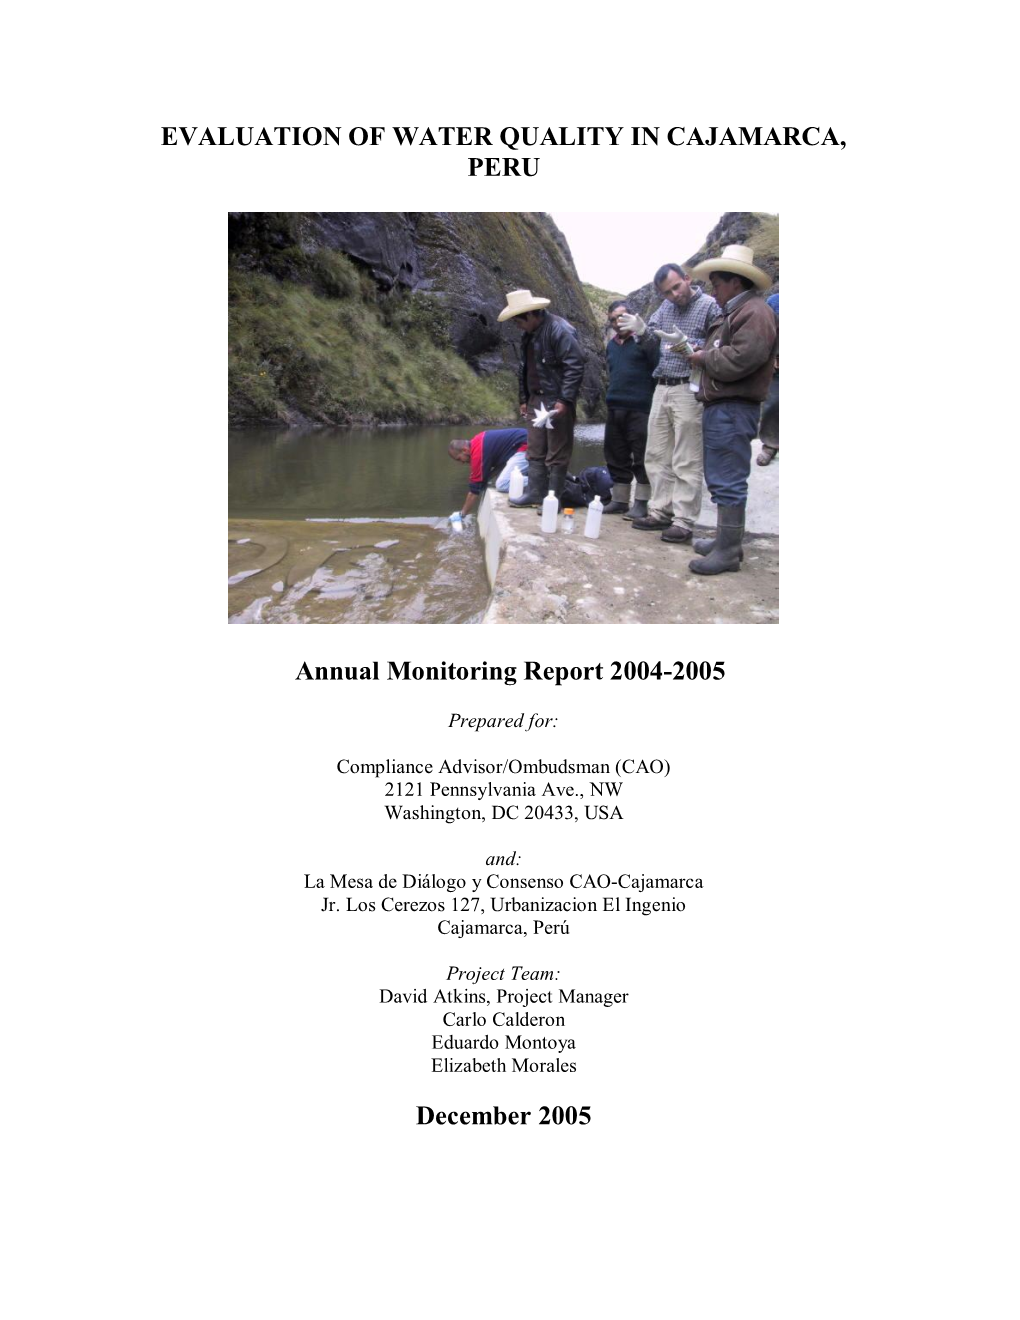 EVALUATION of WATER QUALITY in CAJAMARCA, PERU Annual